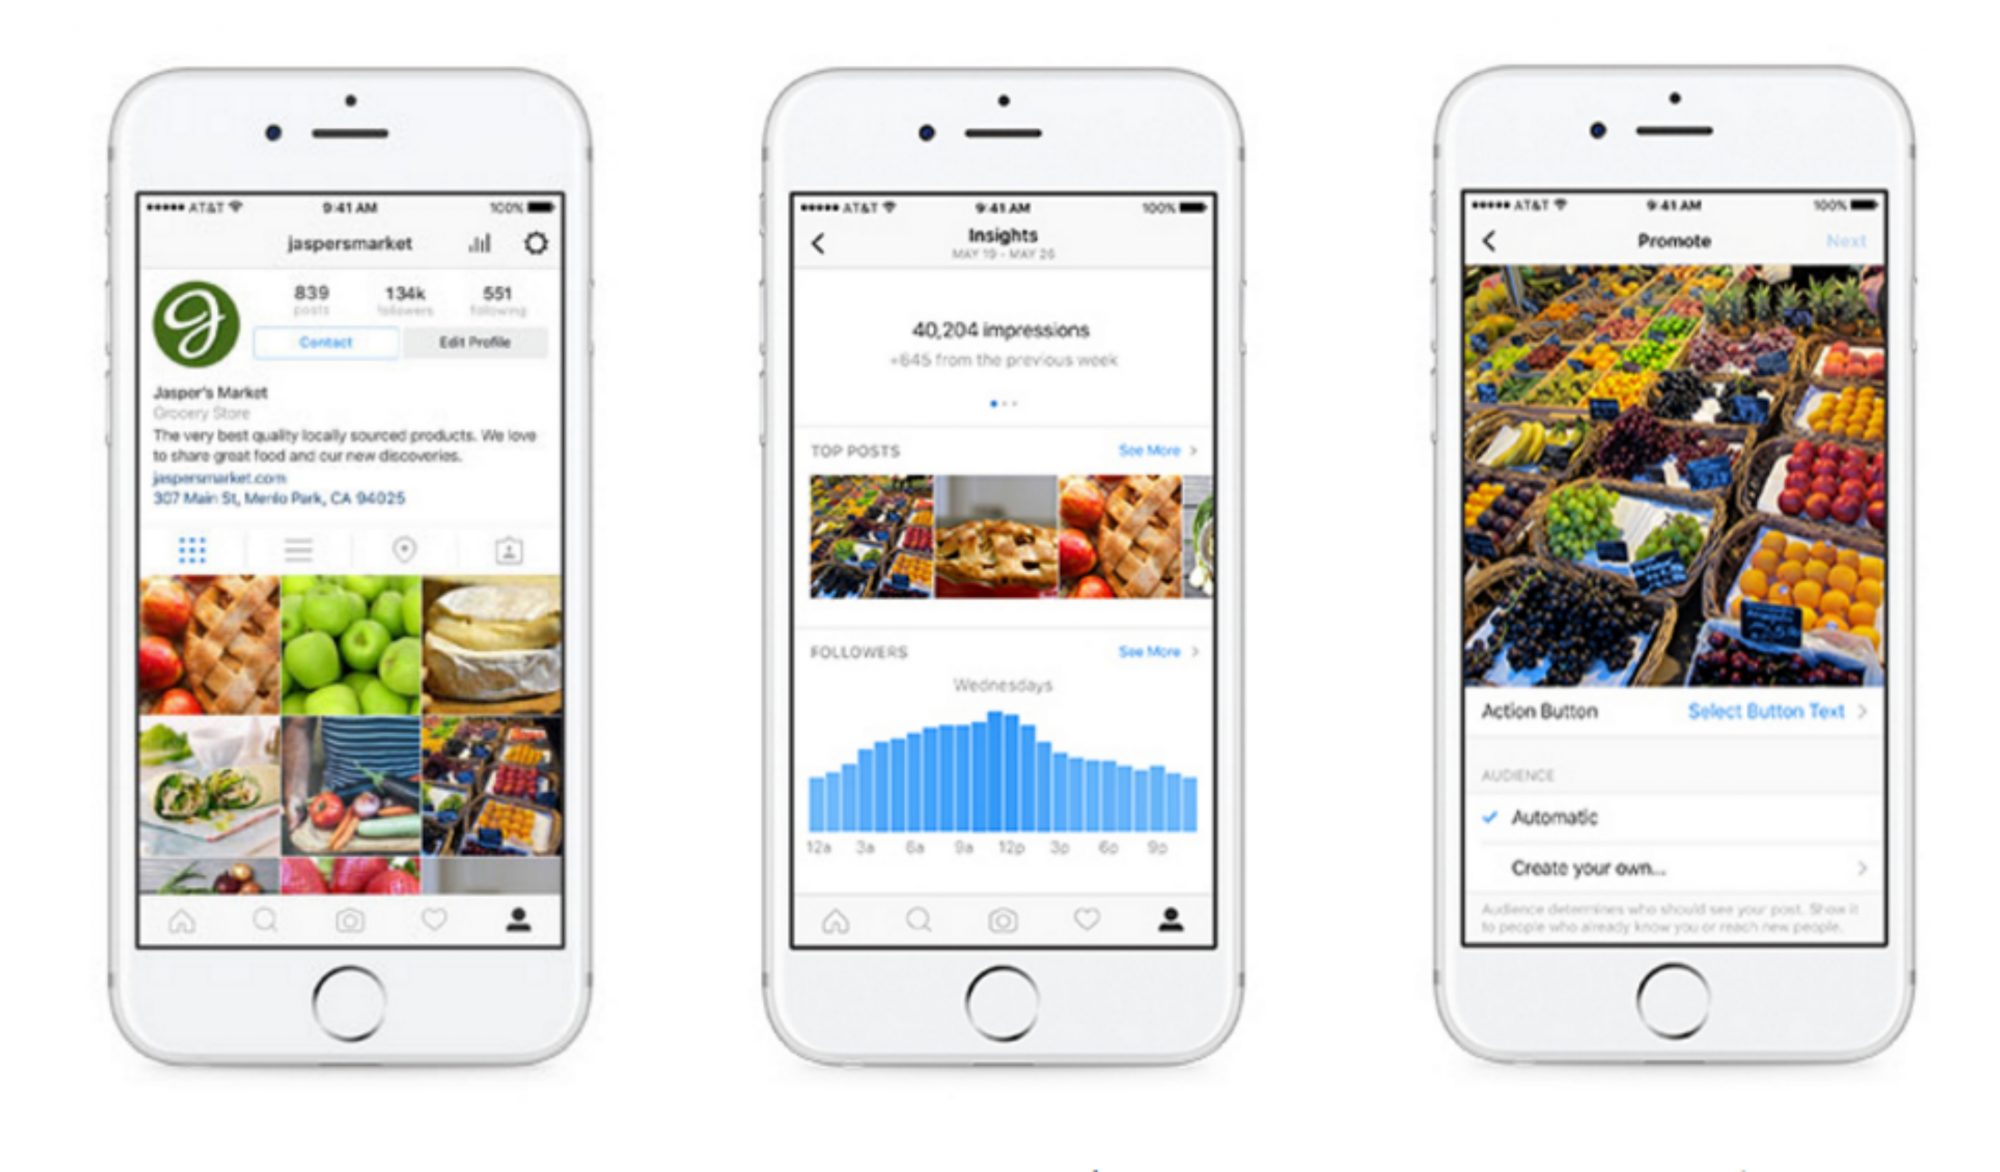 Instagram Rolls Out In-App Local Business Profile Pages